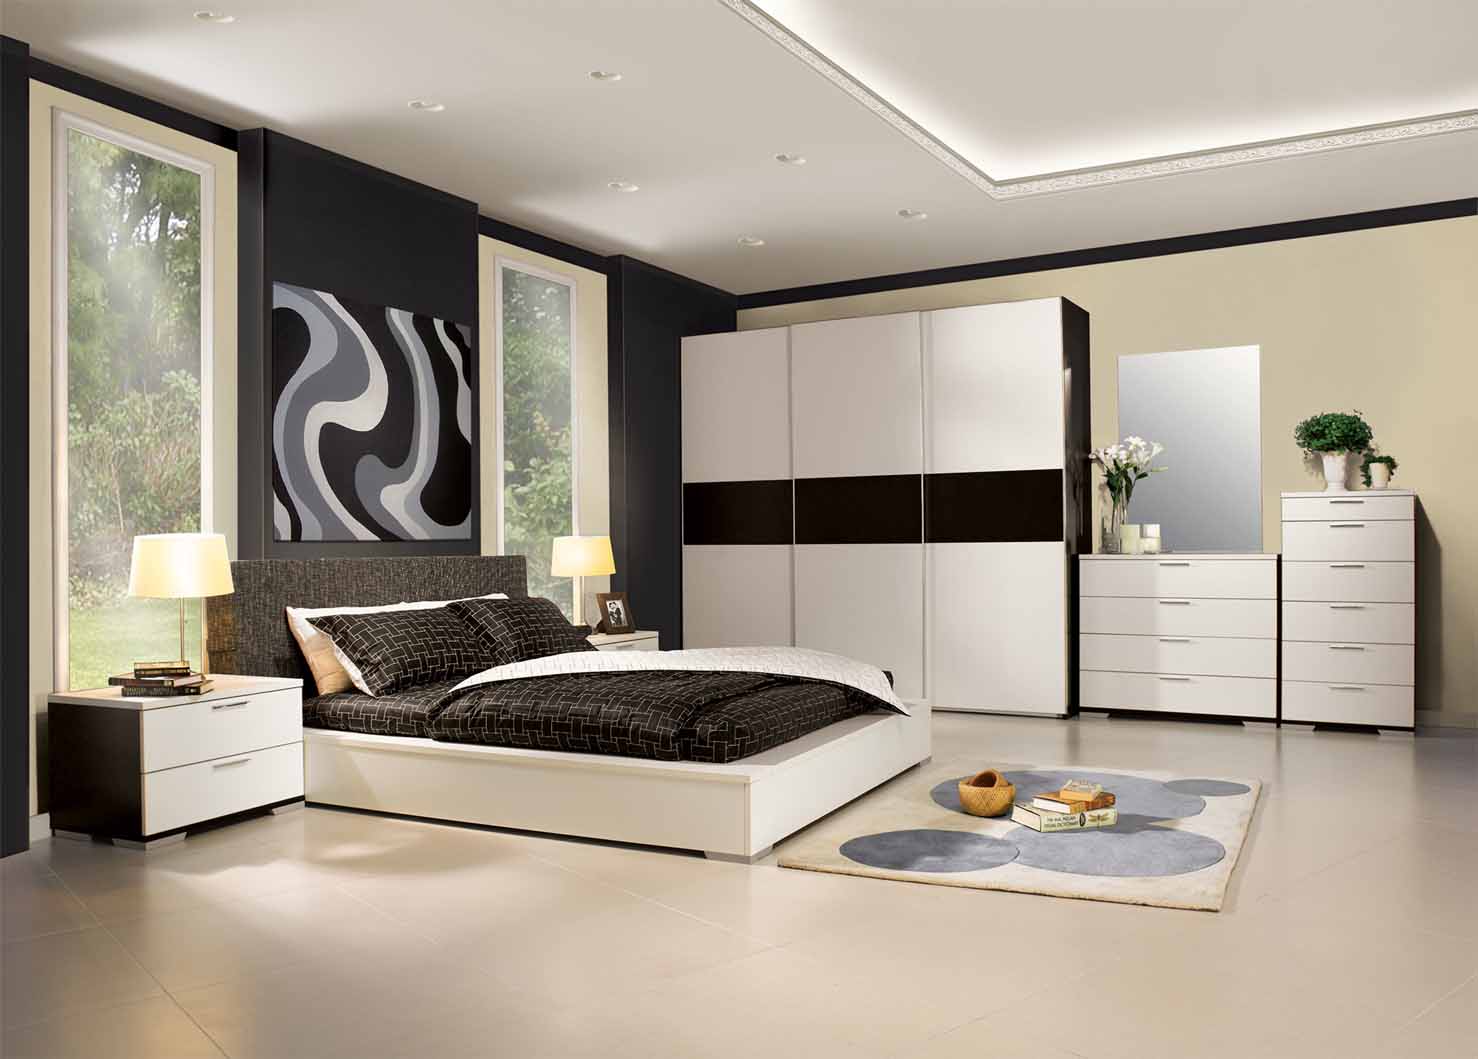 11 Best Bedroom Furniture 2012 ~ Home Interior And Furniture ...